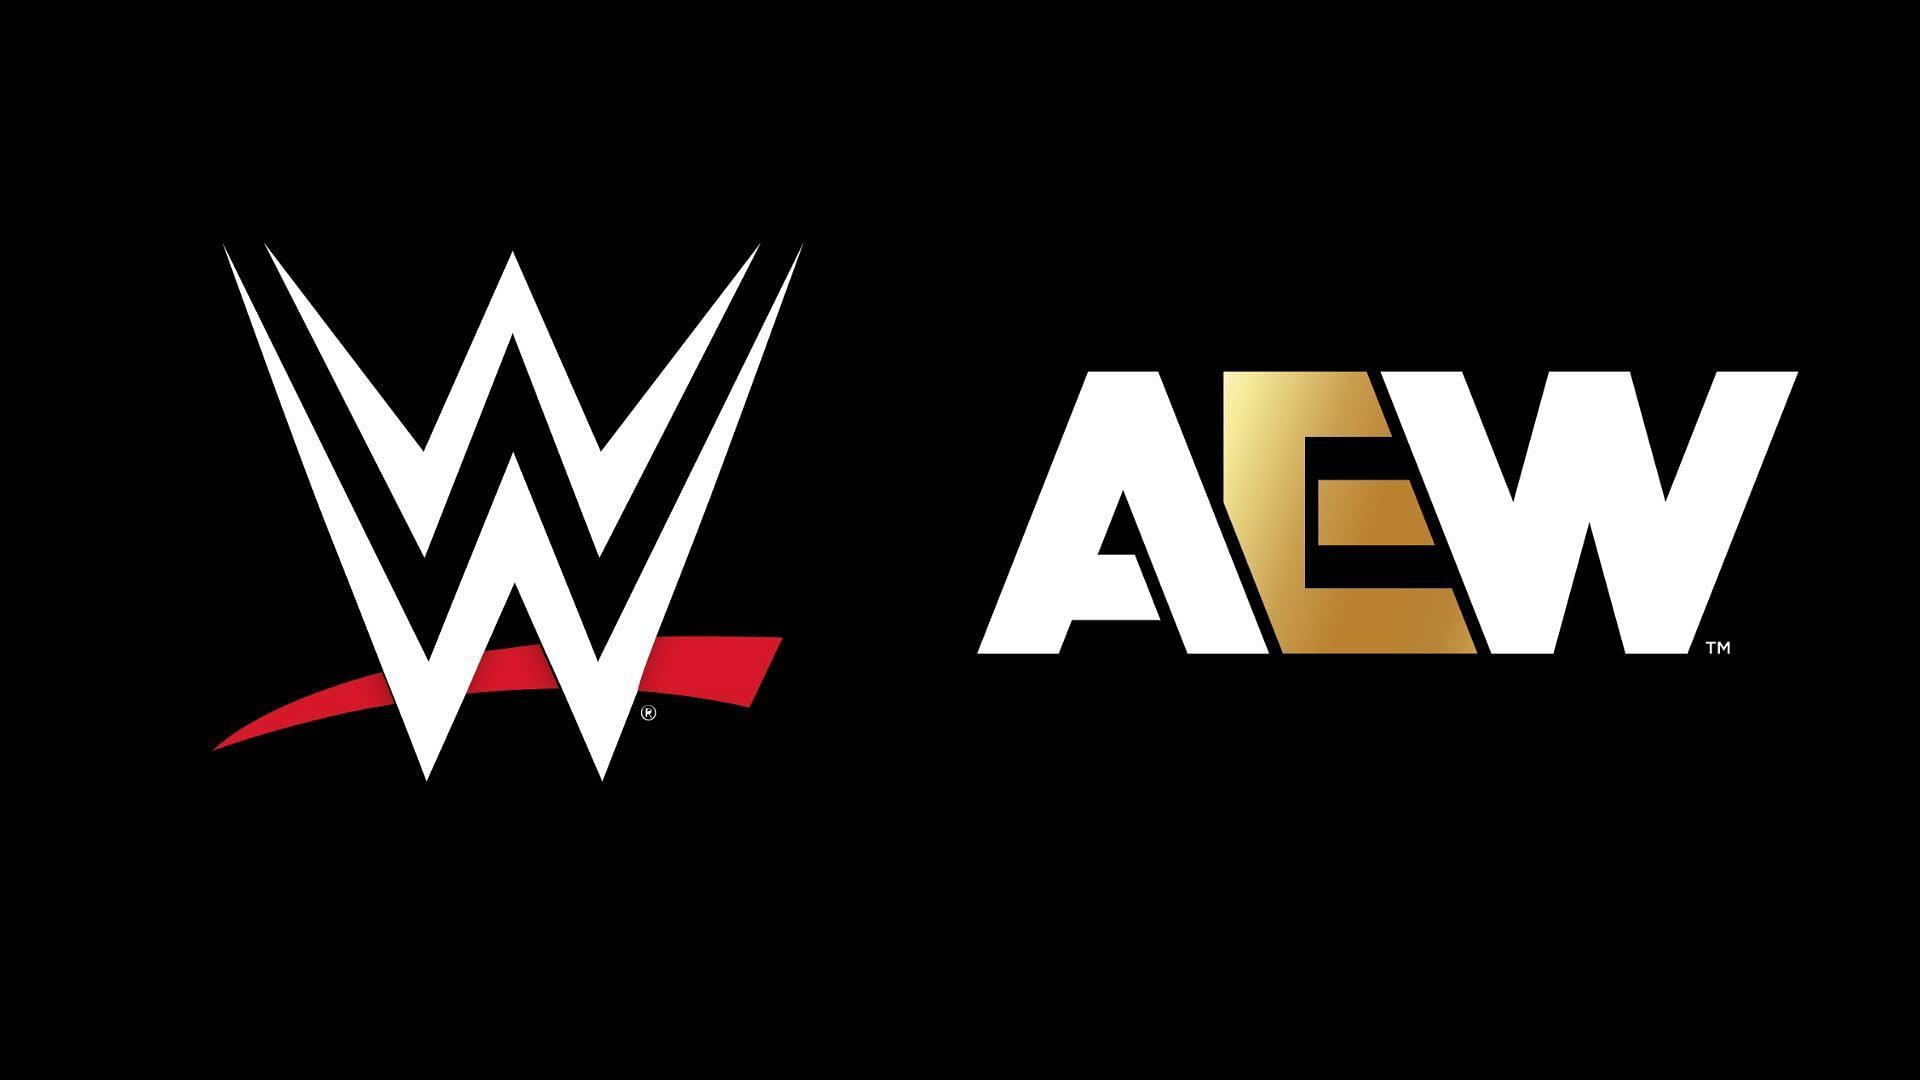 WWE and AEW are top players in the wrestling industry [Photos courtesy of WWE and AEW